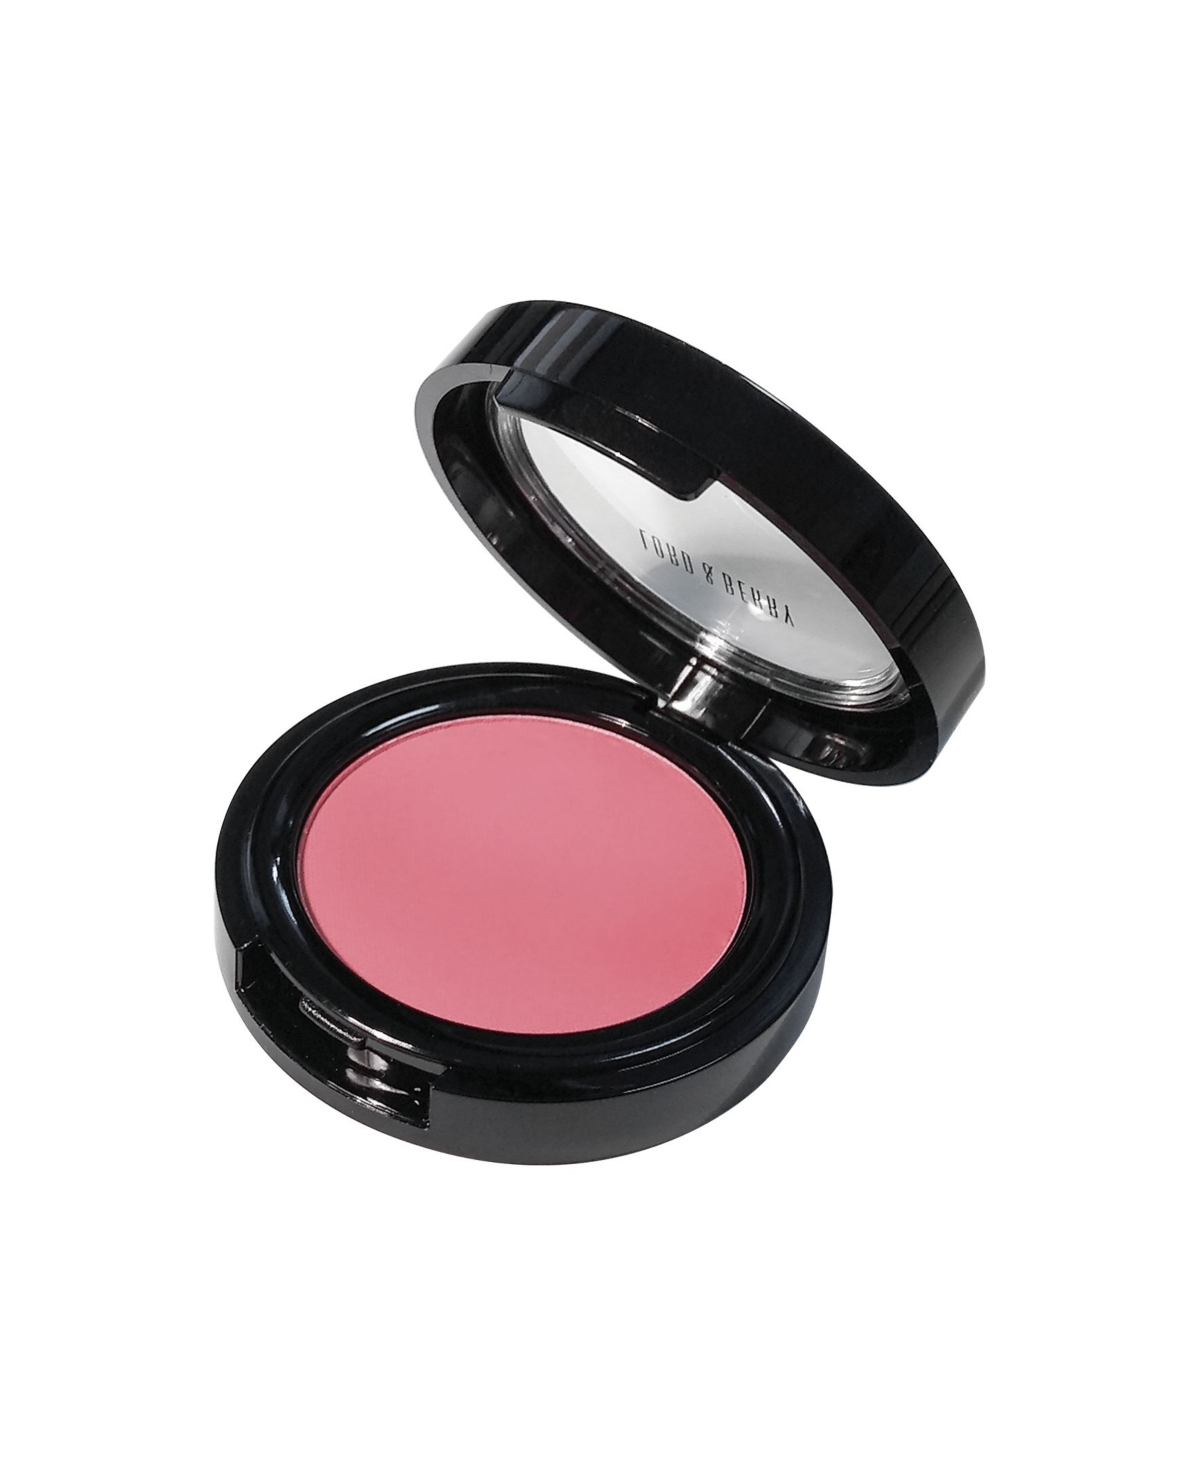 Lord & Berry Face Powder Blush